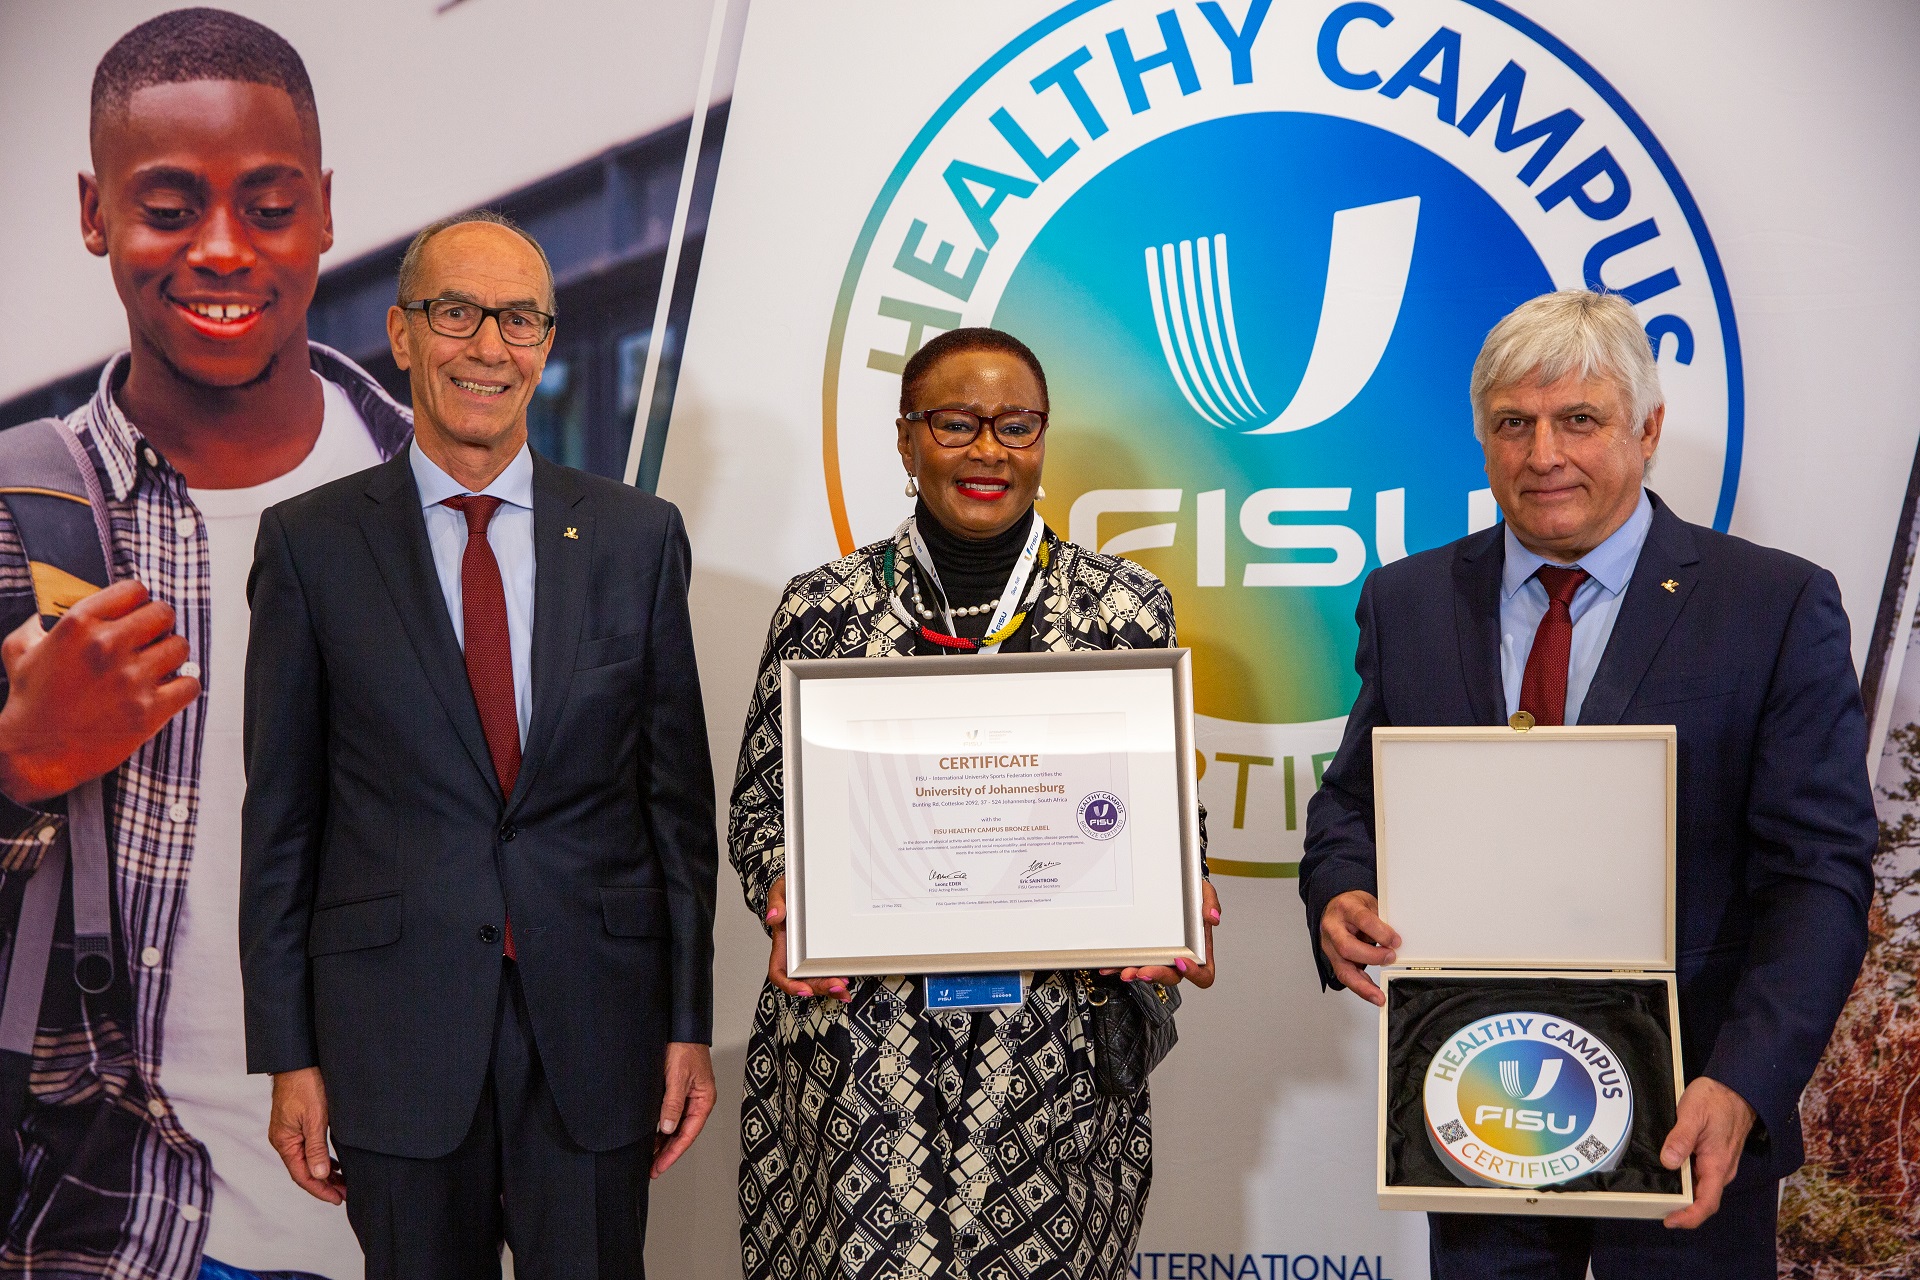 Dr Vukuza Receives The Healthy Campus Bronze Label Certificate In Brussels